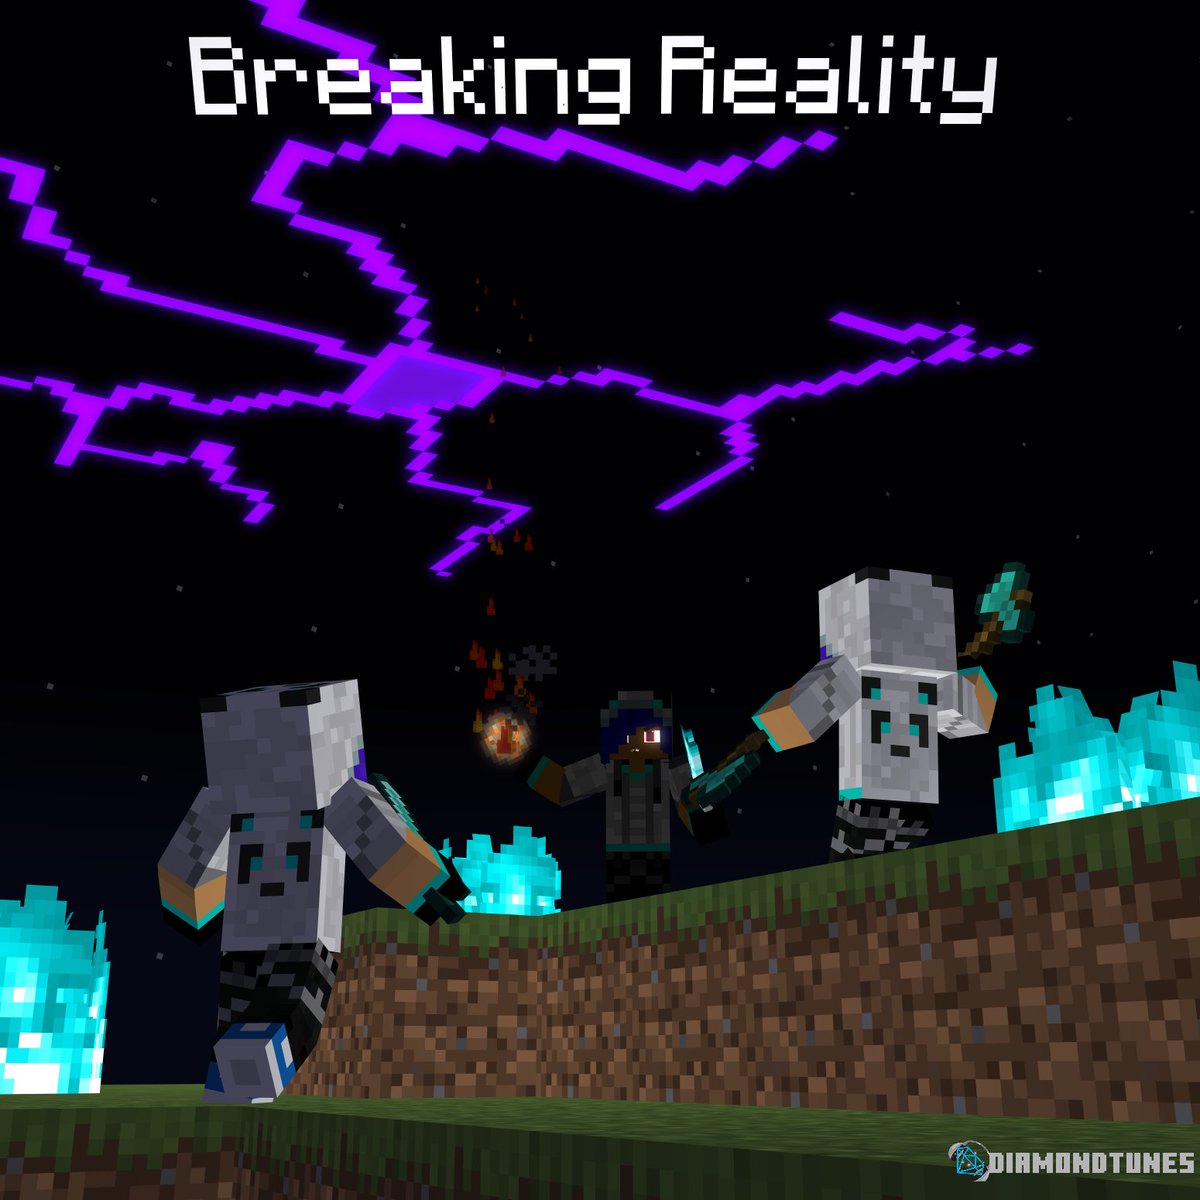 The Cover Art for the next DiamondTunes Album called Breaking Reality. The Music from this album is based off my Minecraft Animations Series 'Breaking Reality'.